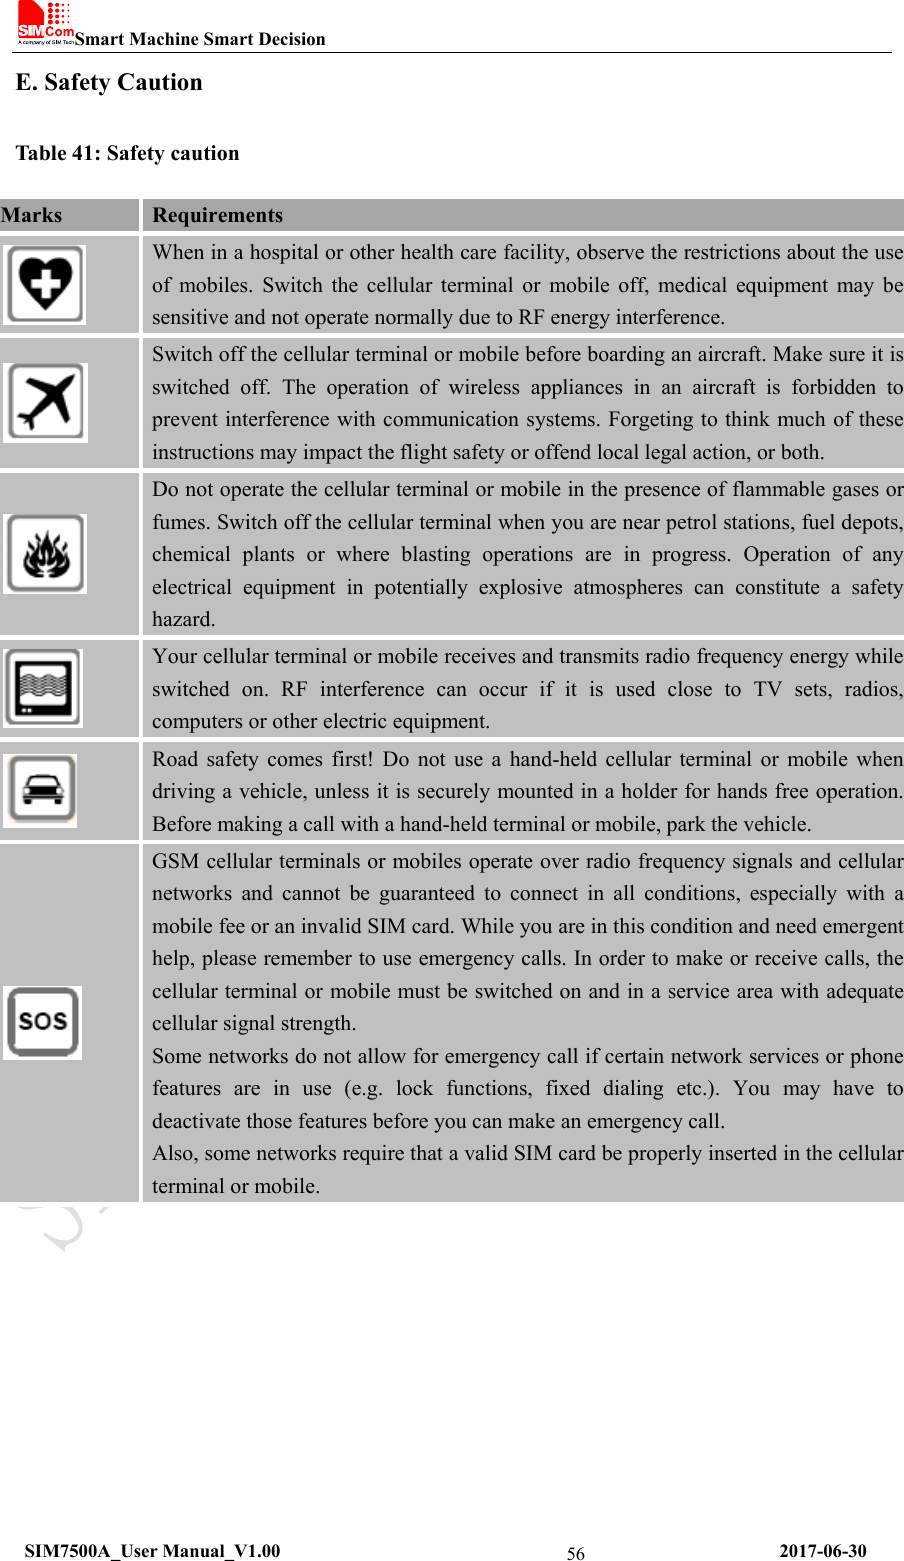 Smart Machine Smart Decision   SIM7500A_User Manual_V1.00                                                      2017-06-30 56E. Safety Caution Table 41: Safety caution Marks  Requirements  When in a hospital or other health care facility, observe the restrictions about the use of  mobiles.  Switch  the  cellular  terminal  or  mobile  off,  medical equipment may be sensitive and not operate normally due to RF energy interference.  Switch off the cellular terminal or mobile before boarding an aircraft. Make sure it is switched  off.  The  operation  of  wireless  appliances  in  an  aircraft  is  forbidden  to prevent interference with communication systems. Forgeting to think much of these instructions may impact the flight safety or offend local legal action, or both.  Do not operate the cellular terminal or mobile in the presence of flammable gases or fumes. Switch off the cellular terminal when you are near petrol stations, fuel depots, chemical  plants  or  where  blasting  operations  are  in  progress.  Operation  of  any electrical  equipment  in  potentially  explosive  atmospheres  can  constitute  a  safety hazard.  Your cellular terminal or mobile receives and transmits radio frequency energy while switched  on.  RF  interference  can  occur  if  it  is  used  close  to  TV  sets,  radios, computers or other electric equipment.  Road  safety  comes first!  Do  not  use  a  hand-held  cellular  terminal or mobile when driving a vehicle, unless it is securely mounted in a holder for hands free operation. Before making a call with a hand-held terminal or mobile, park the vehicle.  GSM cellular terminals or mobiles operate over radio frequency signals and cellular networks  and  cannot  be  guaranteed  to  connect  in  all  conditions,  especially  with  a mobile fee or an invalid SIM card. While you are in this condition and need emergent help, please remember to use emergency calls. In order to make or receive calls, the cellular terminal or mobile must be switched on and in a service area with adequate cellular signal strength. Some networks do not allow for emergency call if certain network services or phone features  are  in  use  (e.g.  lock  functions,  fixed  dialing  etc.).  You  may  have  to deactivate those features before you can make an emergency call. Also, some networks require that a valid SIM card be properly inserted in the cellular terminal or mobile. 